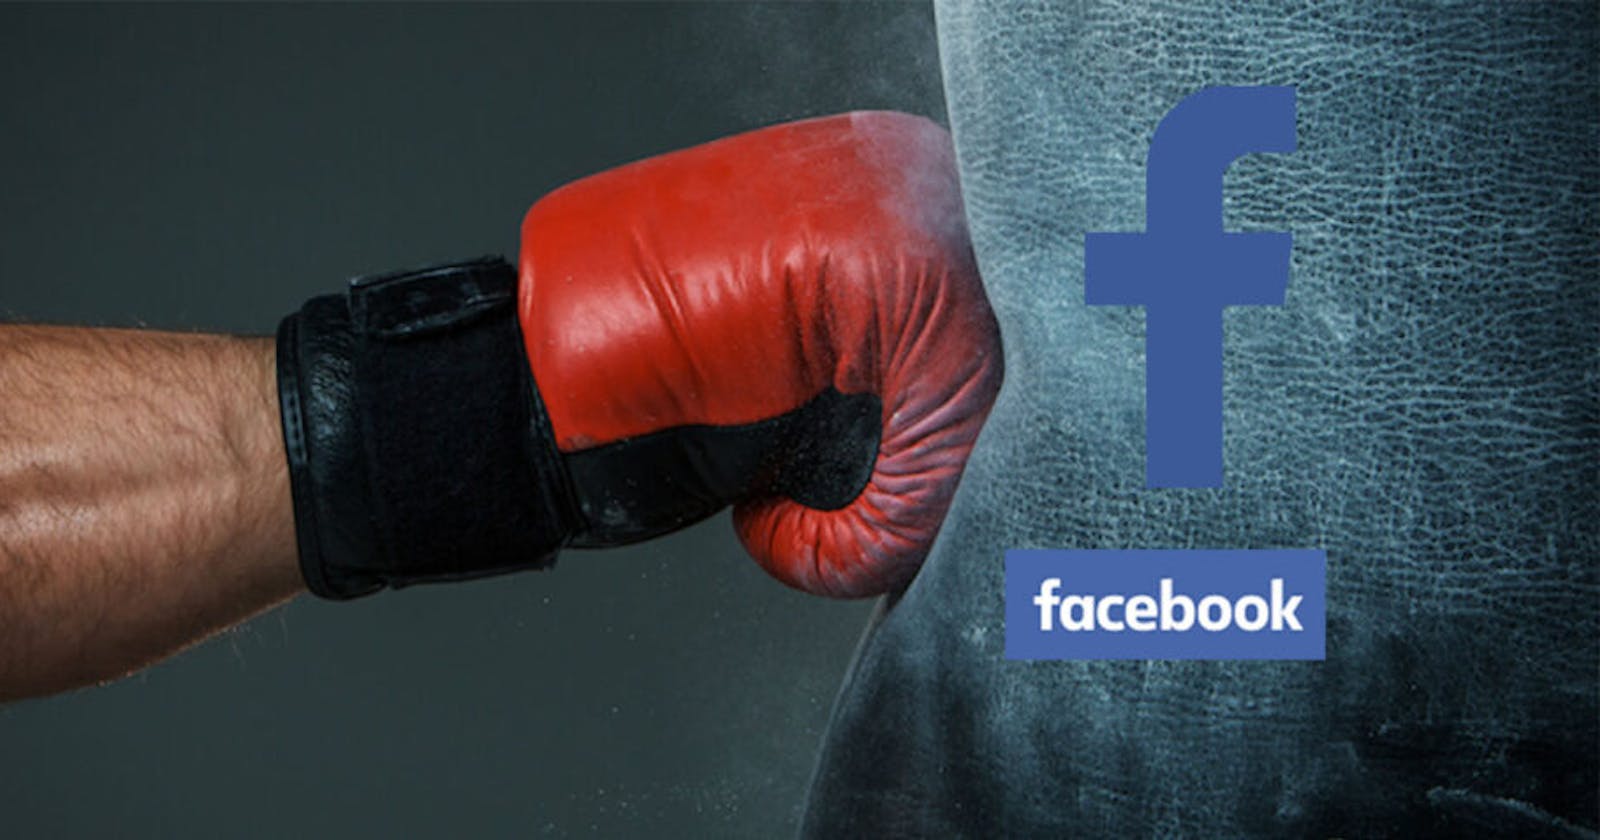 How Facebook Moved from Social Media Giant To “Punching Bag”